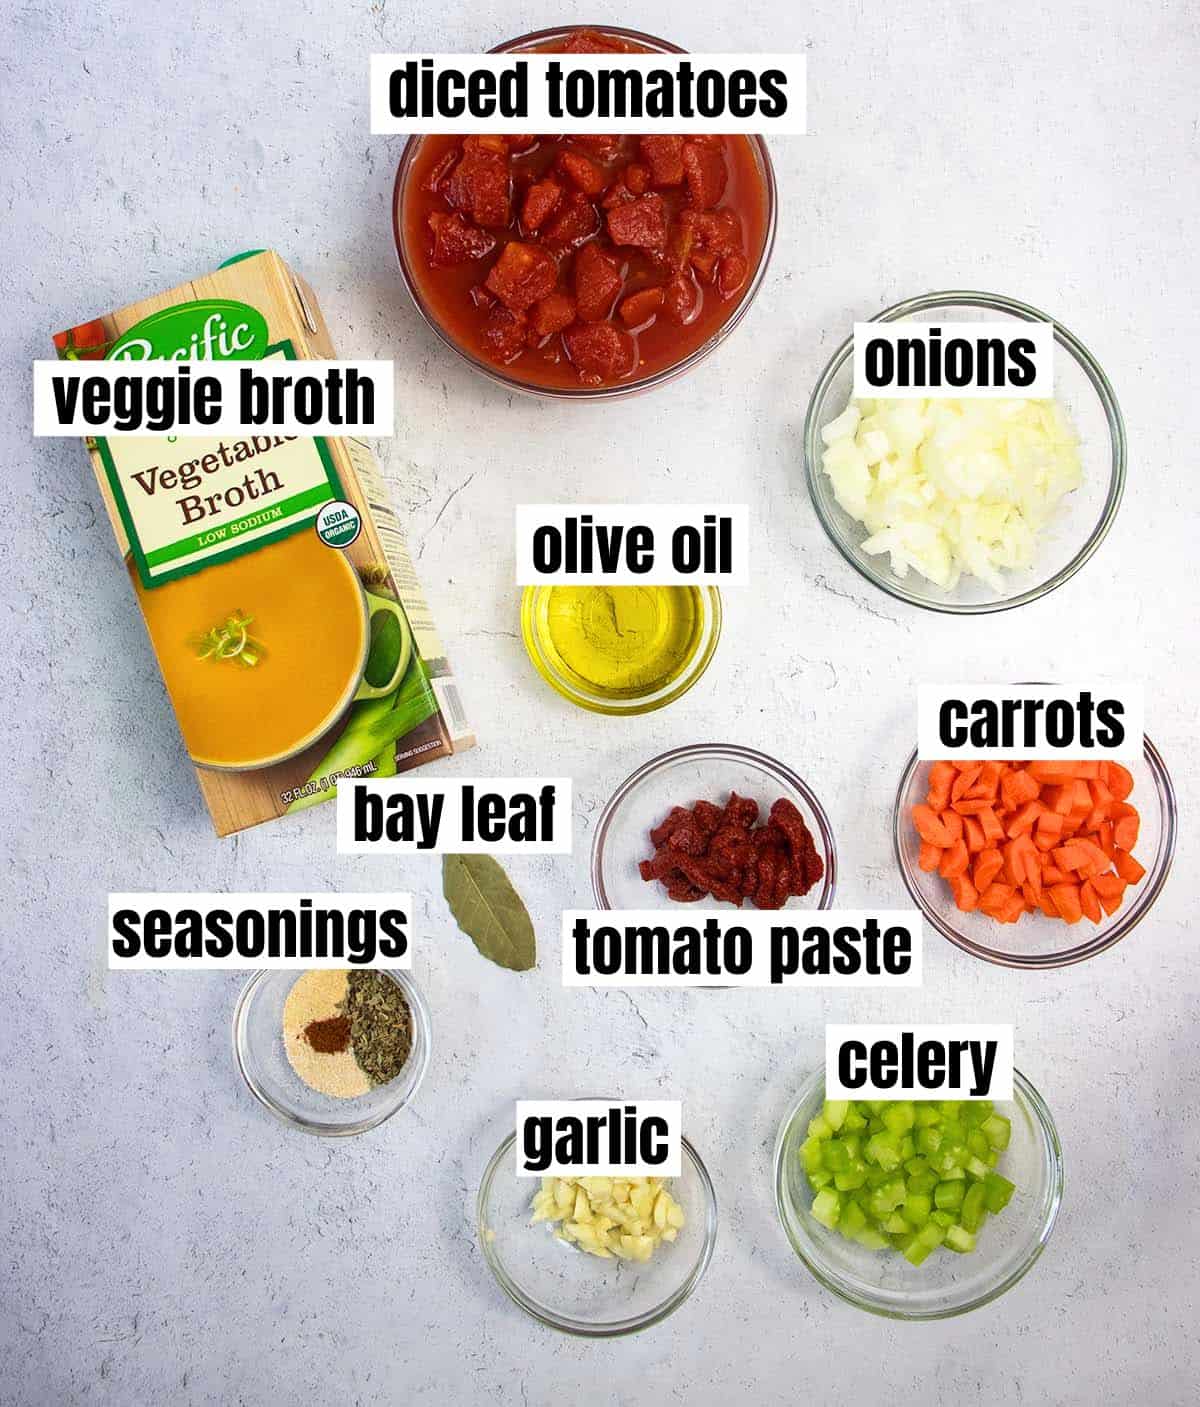 Ingredients in vegan tomato soup which included diced tomatoes, veggie broth, onions, olive oil, carrots, tomato paste, celery, garlic, bay leaf, seasonings.